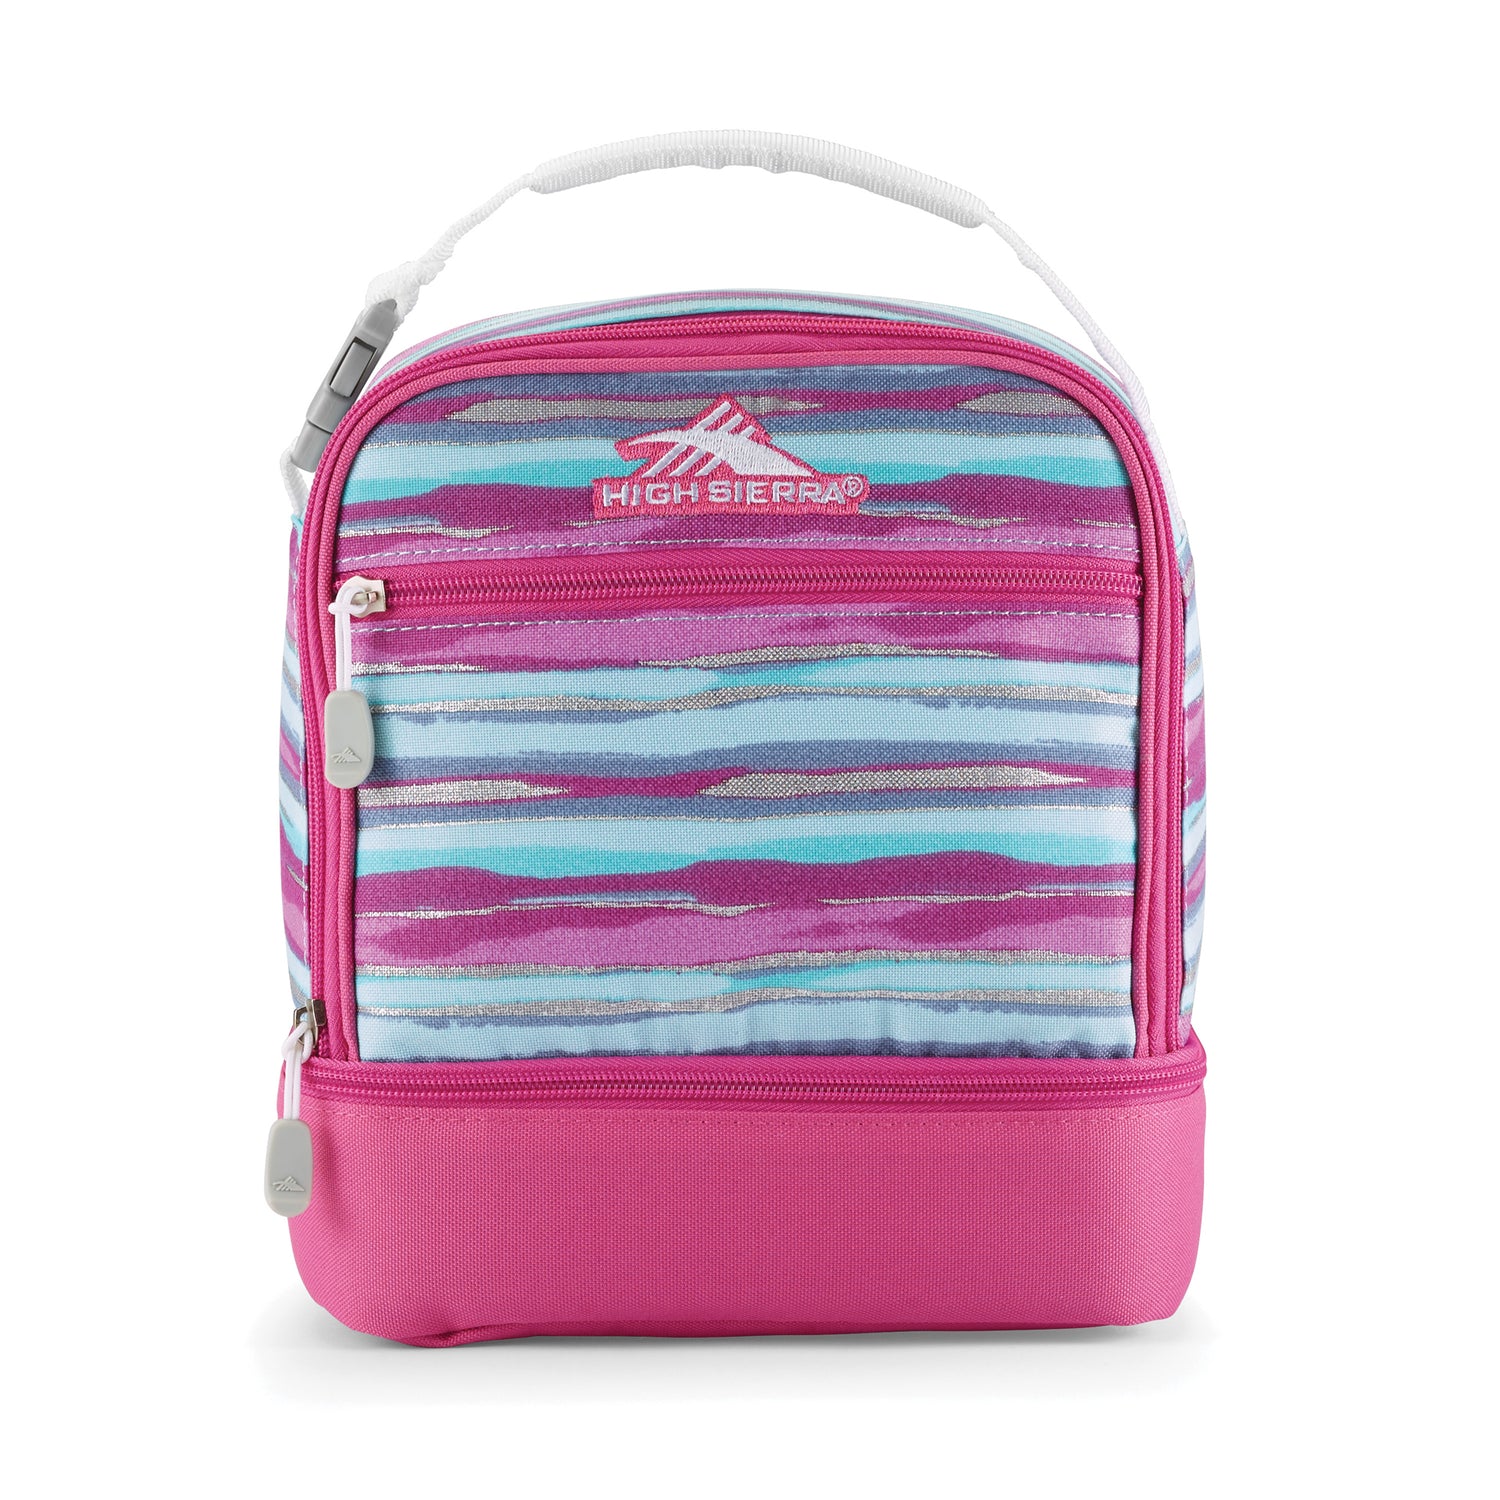 Stacked Lunch Box -  - 

        High Sierra
      
